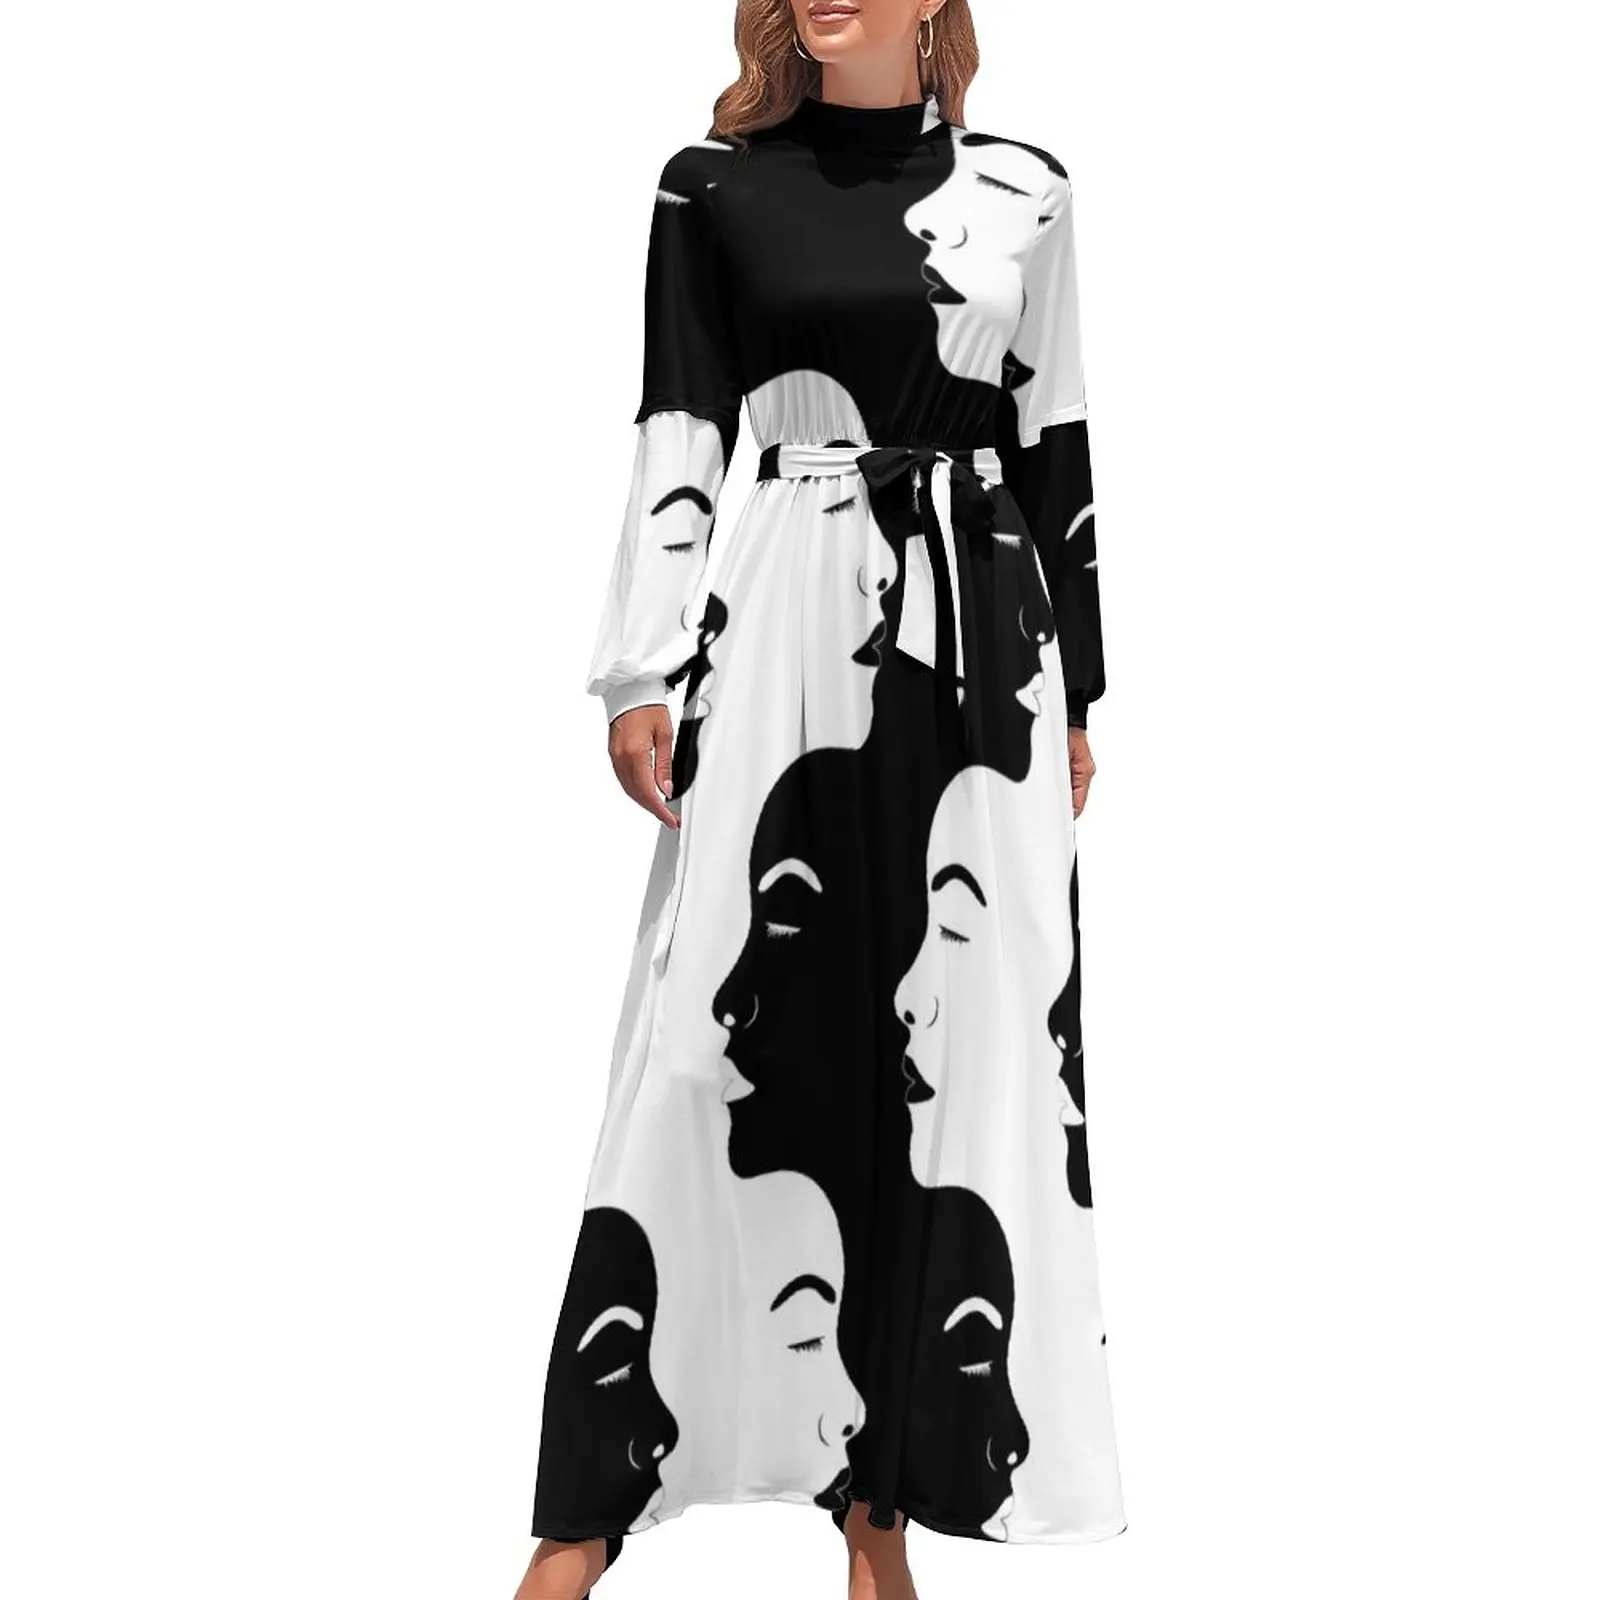 

White And Black Women Head Dress Abstract We Are All The Same Maxi Dress High Waist Long-Sleeve Street Style Beach Long Dresses